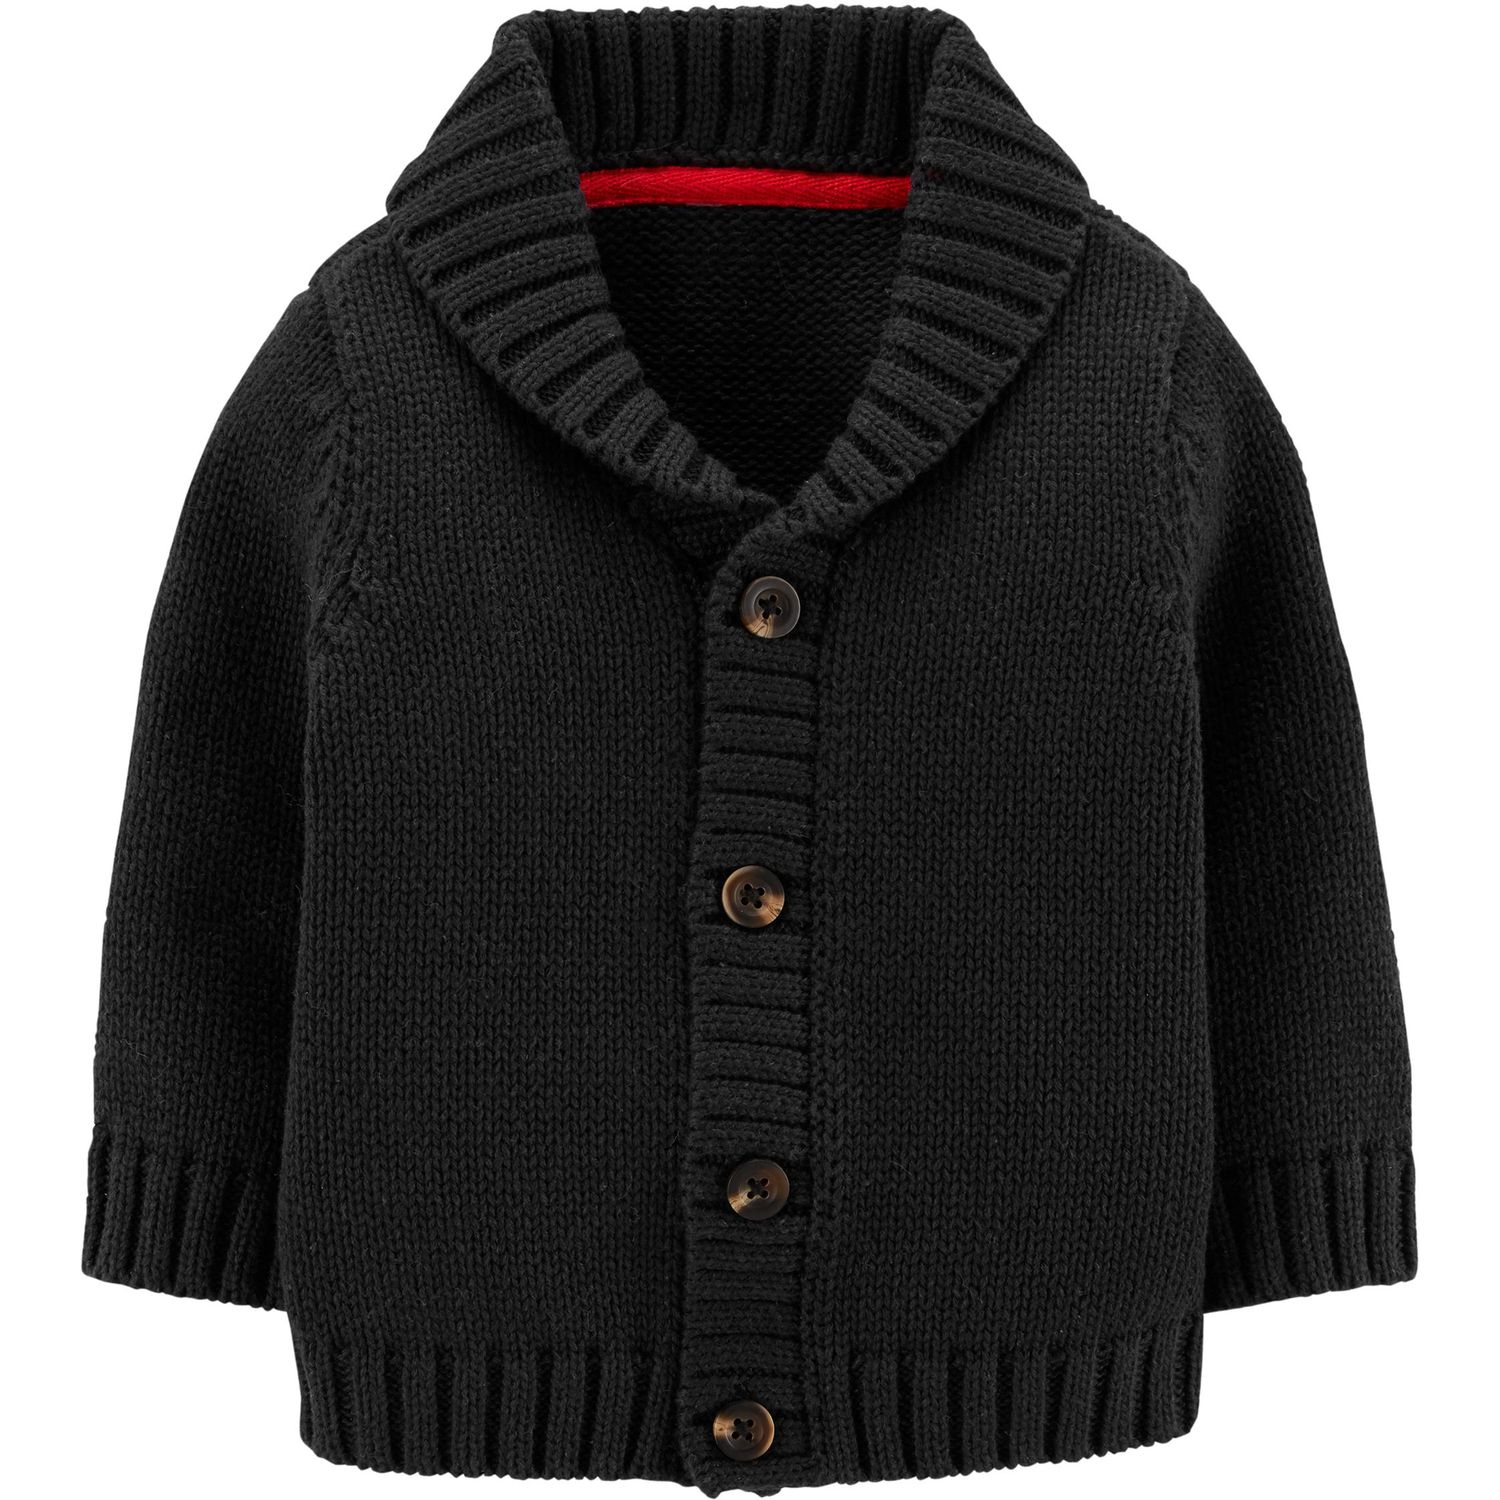 Coodebear Little Baby Boys Vintage Round Collor Thick Cashmere Cardigan Sweater Coats